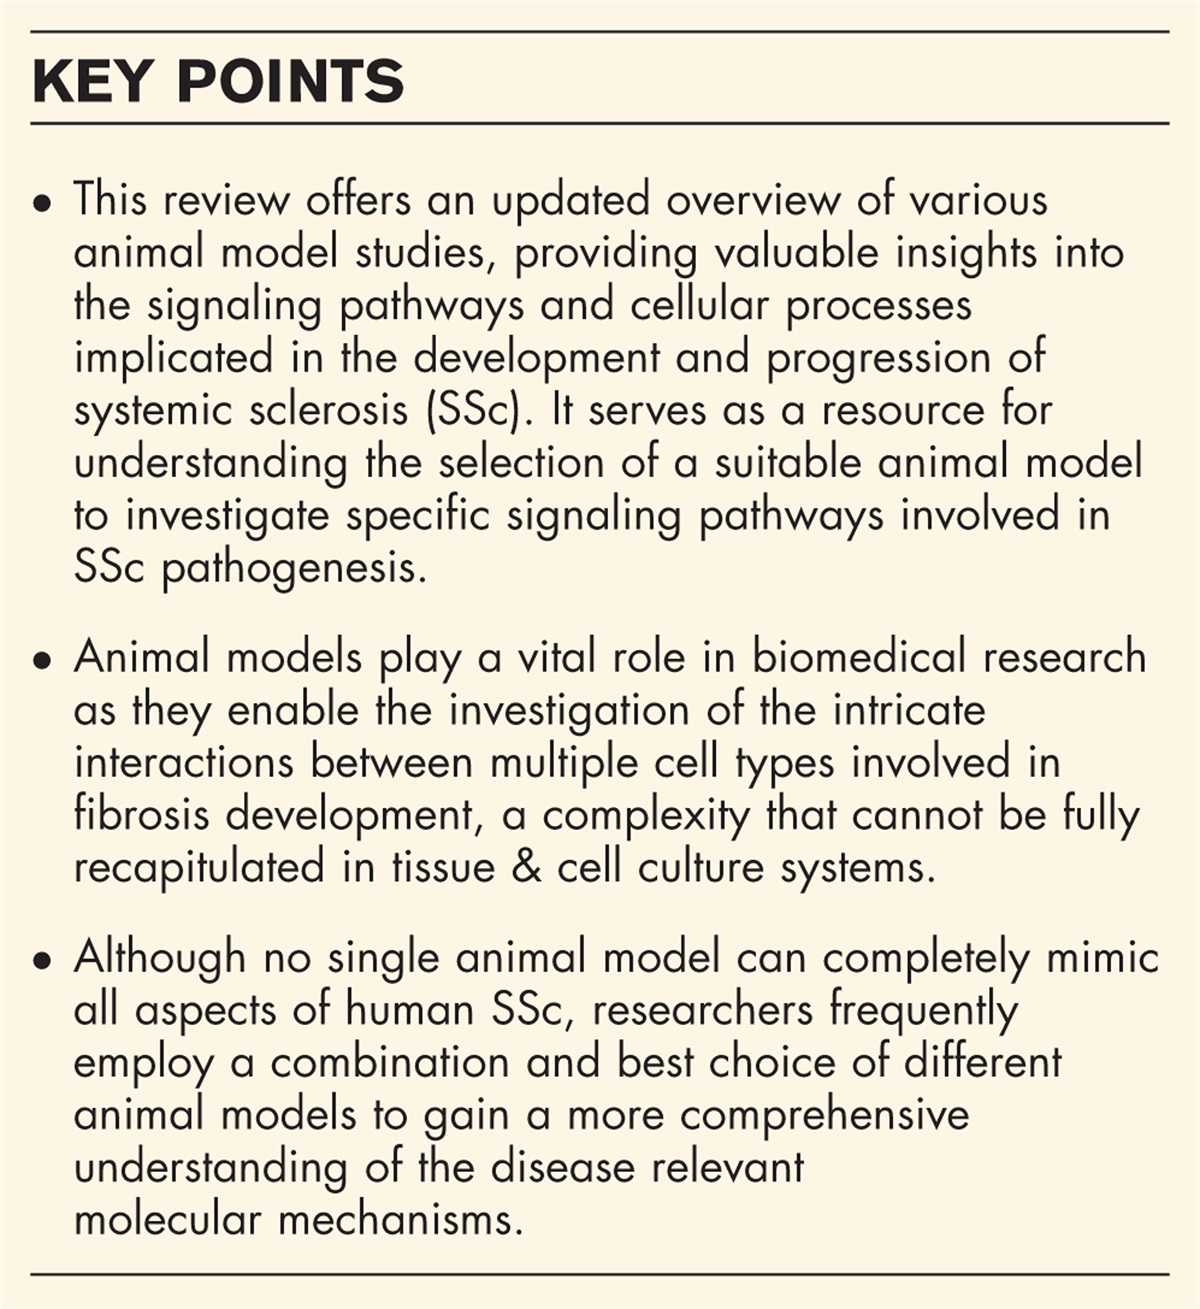 Animal models in systemic sclerosis: an update